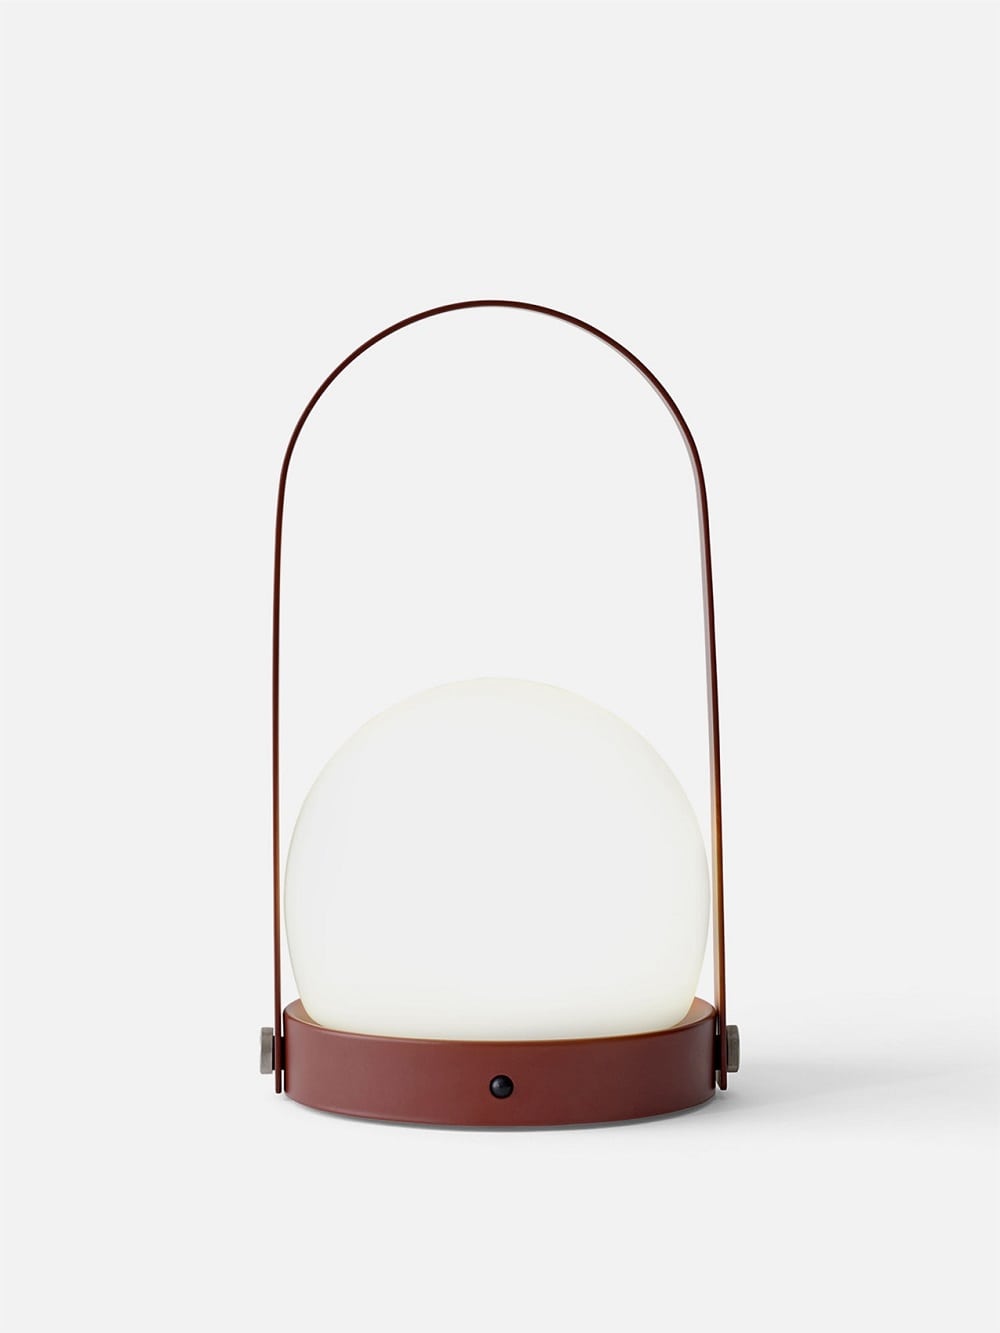 Menu Burgundy Carrie Portable Table Lamp Designed by Norm Architects